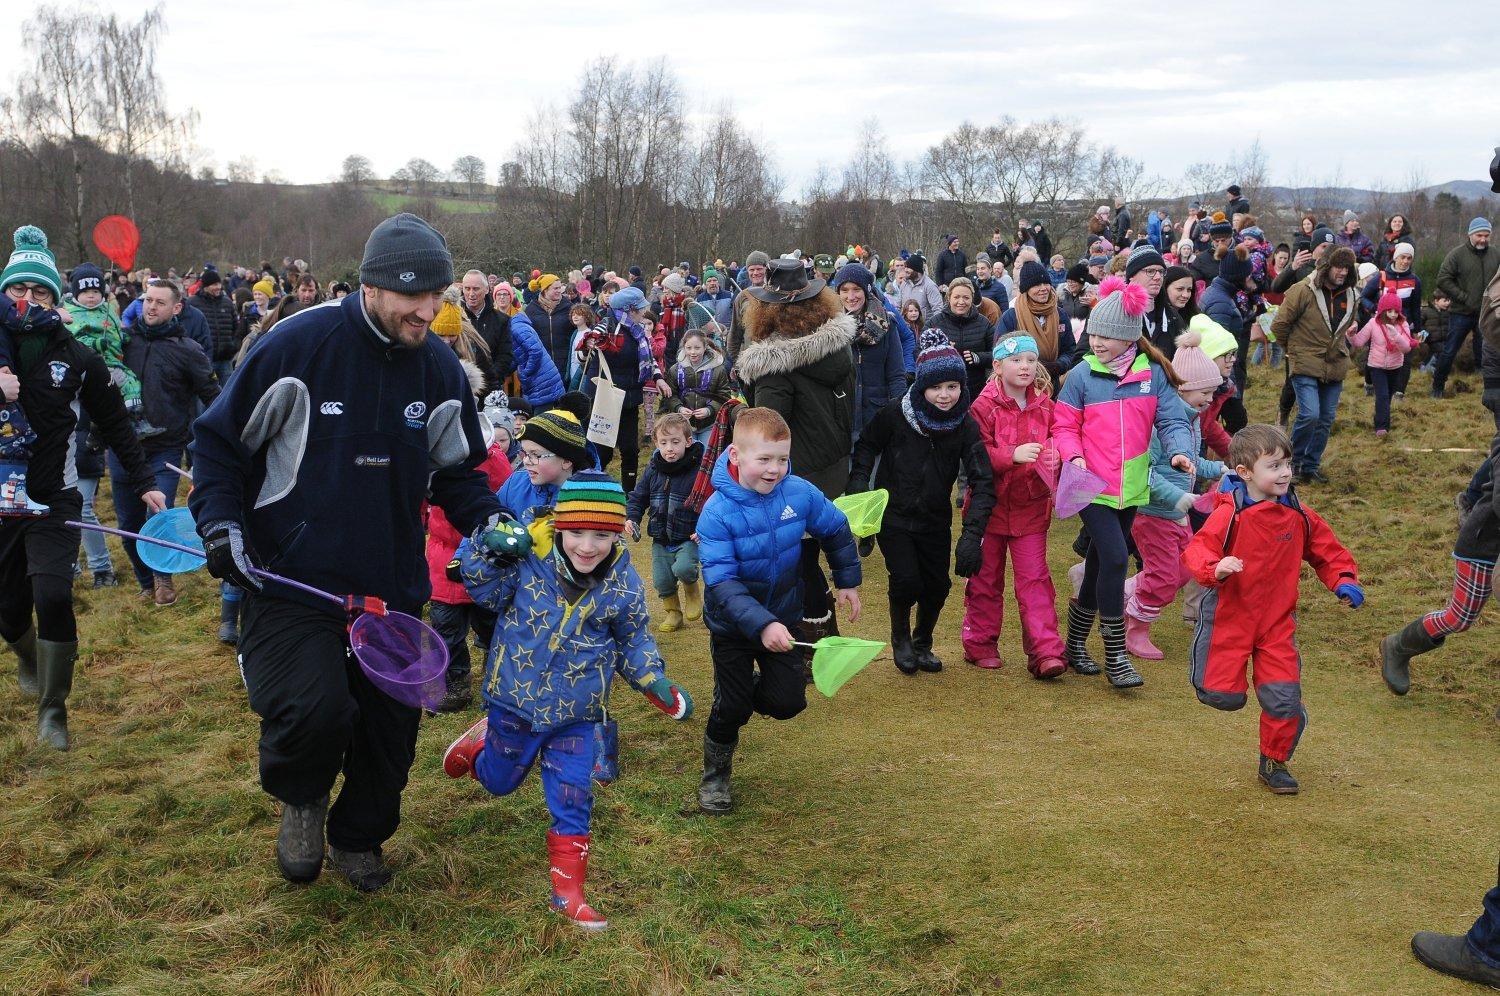 The Great Selkirk Haggis Hunt gets under way on Sunday morning when 567 people climbed Selkirk Hill.